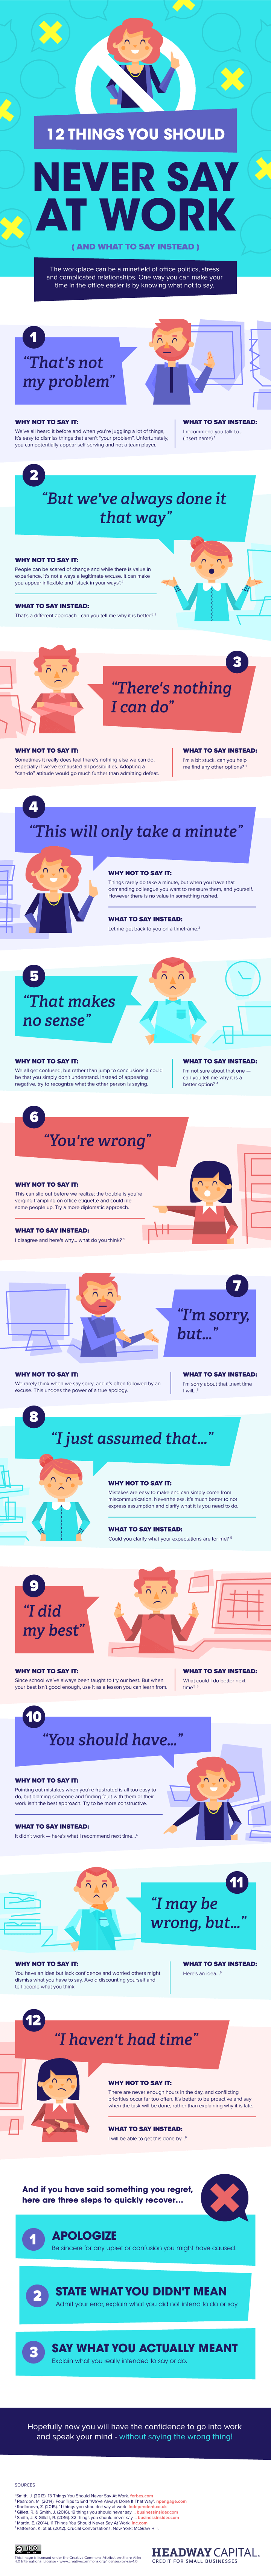 Things not to say in the office